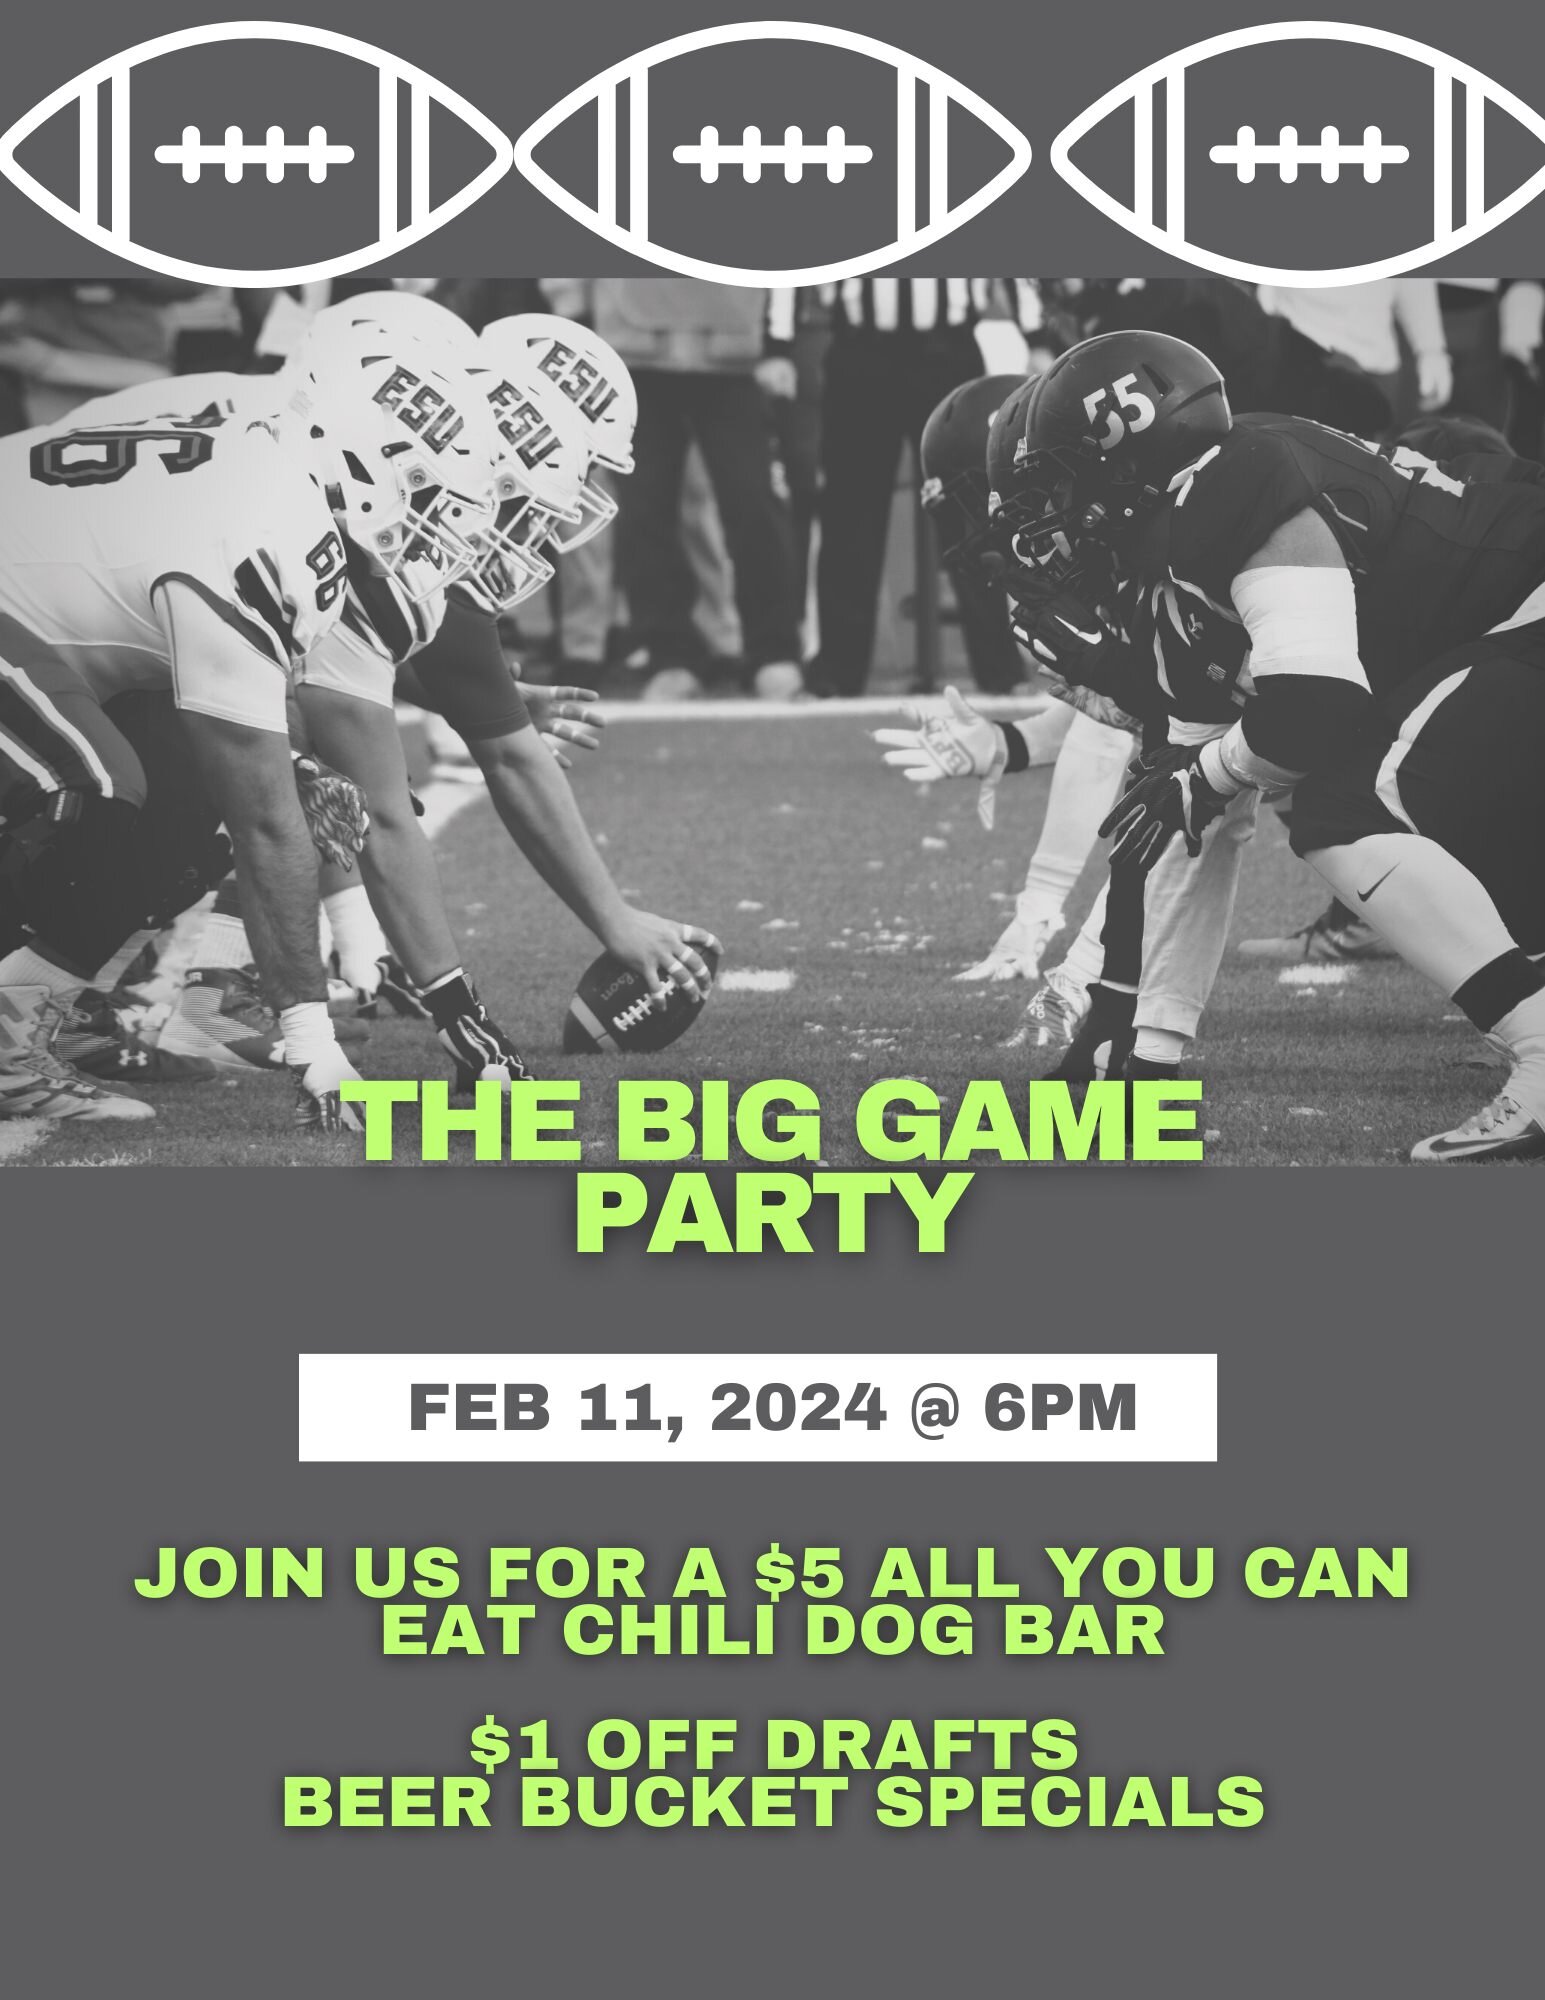 Join us for Super Bowl Sunday!